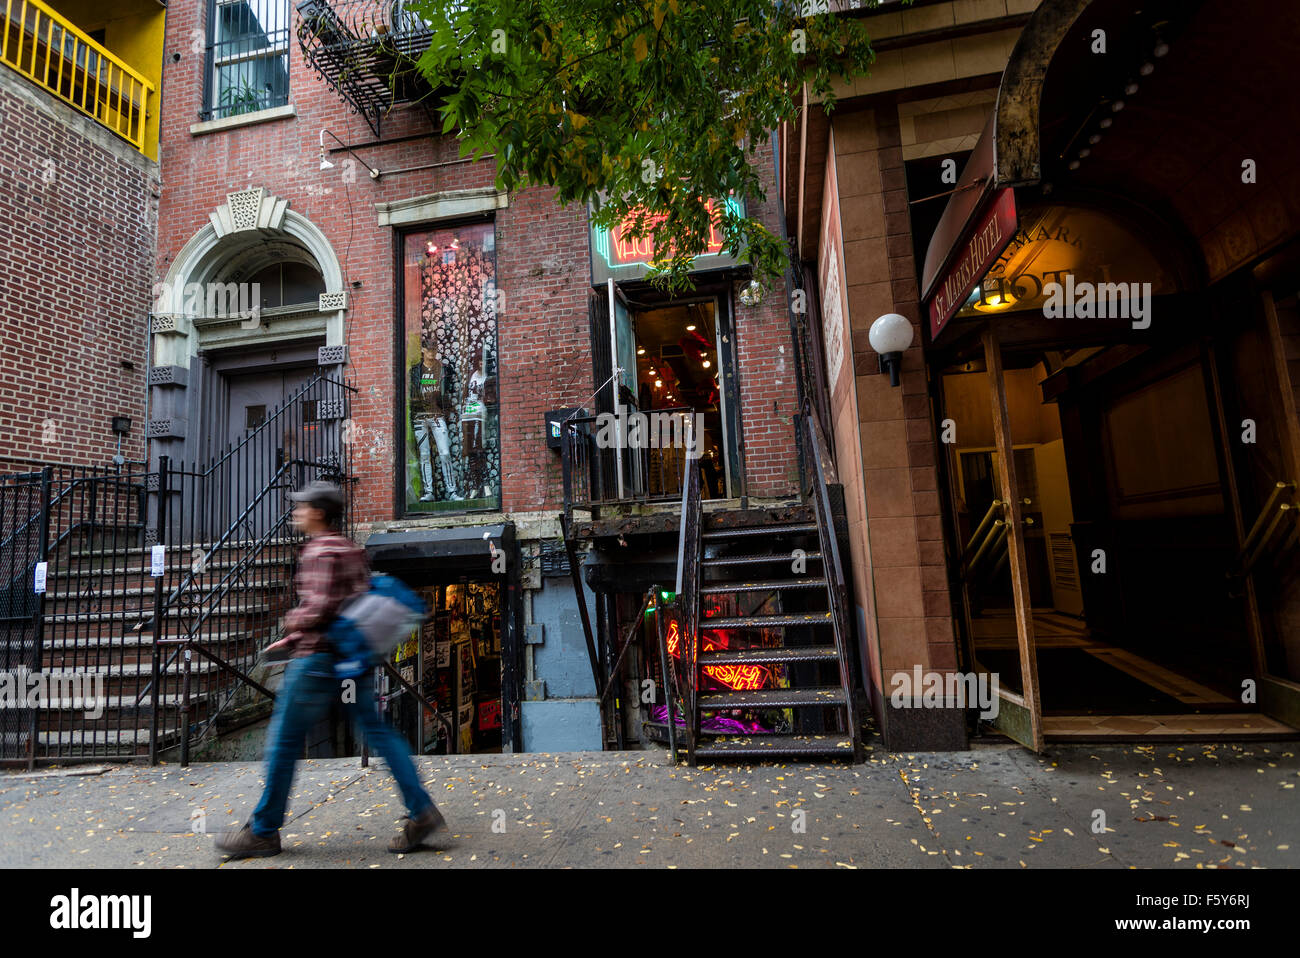 New York, NY 6 Nov 2015 - Trash and Vaudeville on St Mark's Place in the East VIllage ©Stacy Walsh Rosenstock/Alamy Stock Photo